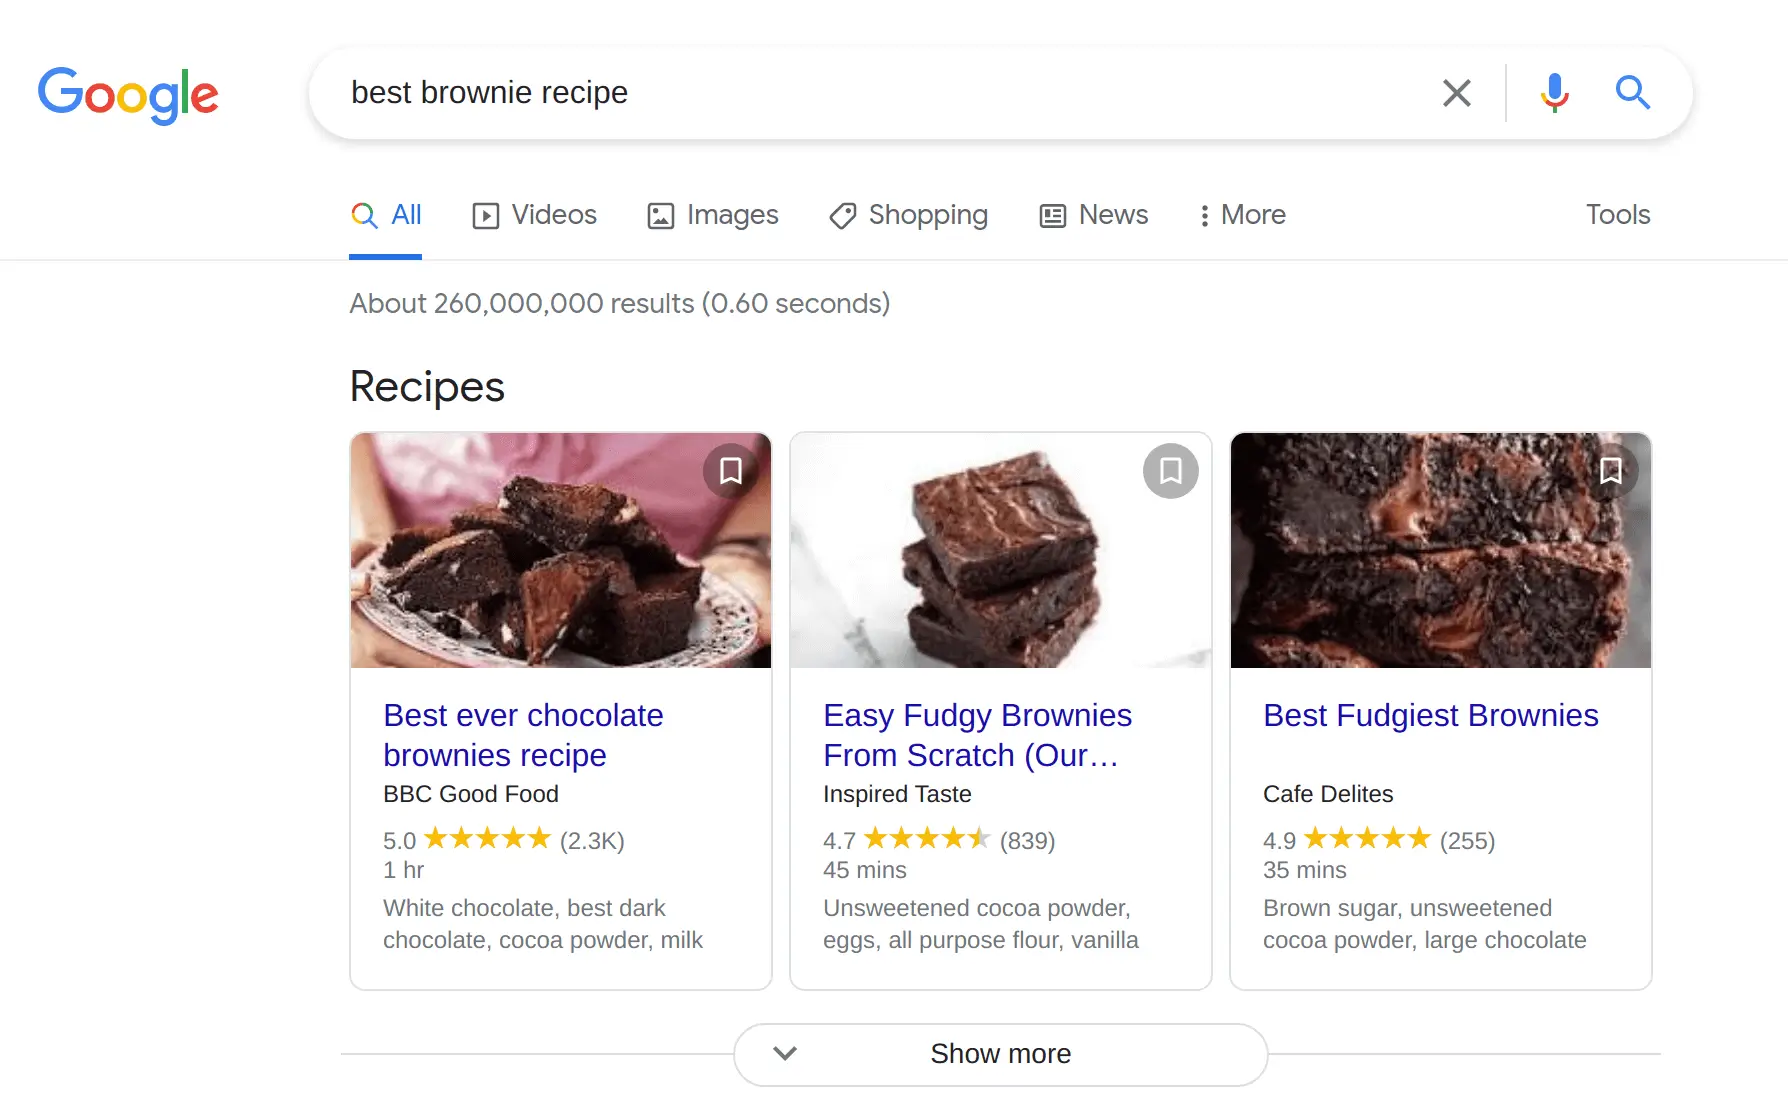 screenshot of google search results for &quot;best brownie recipe&quot; including a rich text results set at the top of the list showing recipes from various sources